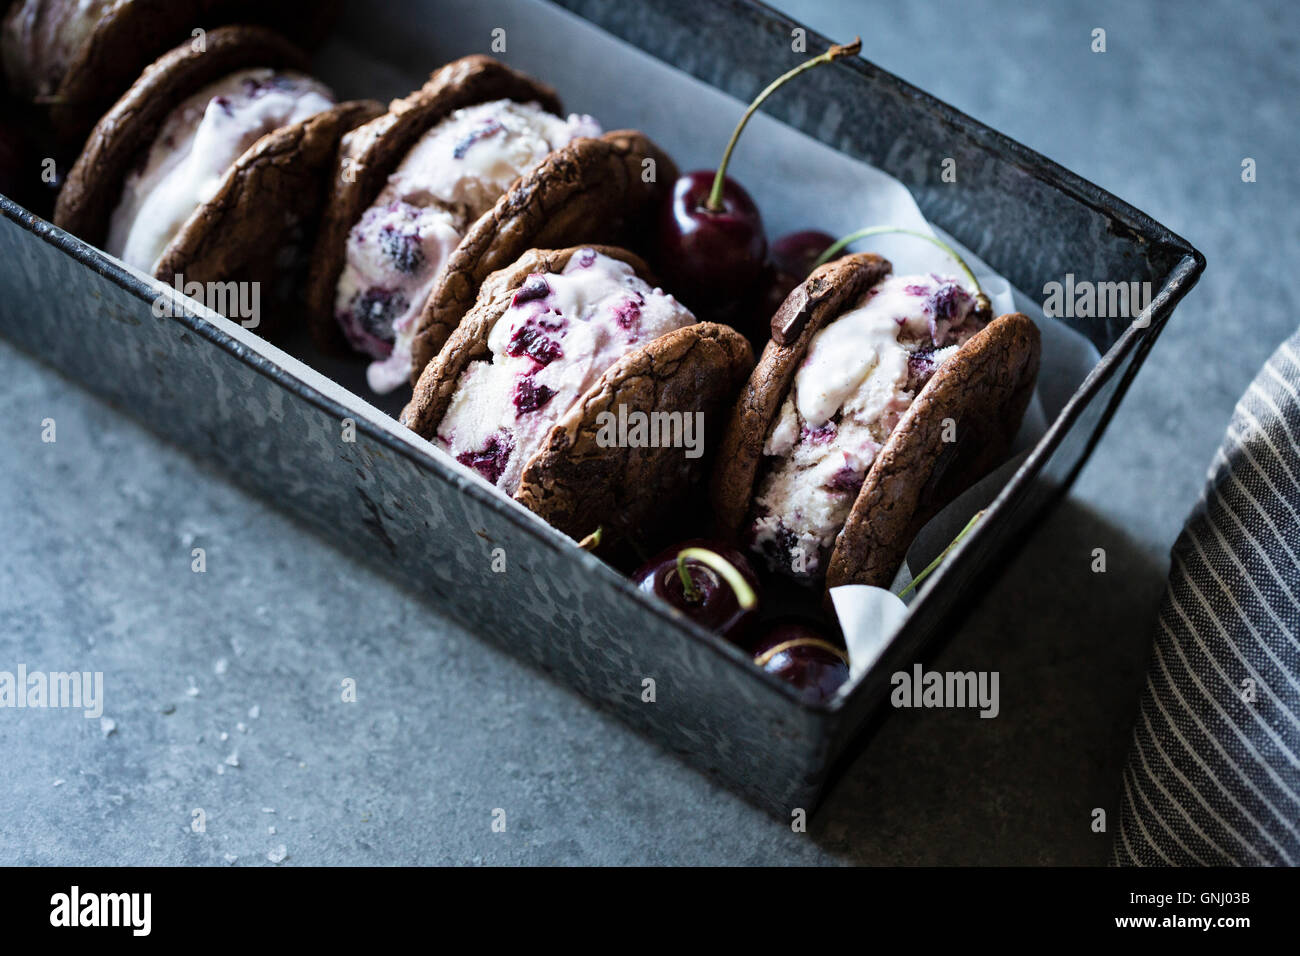 Roasted cherry ice cream sandwiches with salted double chocolate buckwheat cookies (gluten-free) Stock Photo